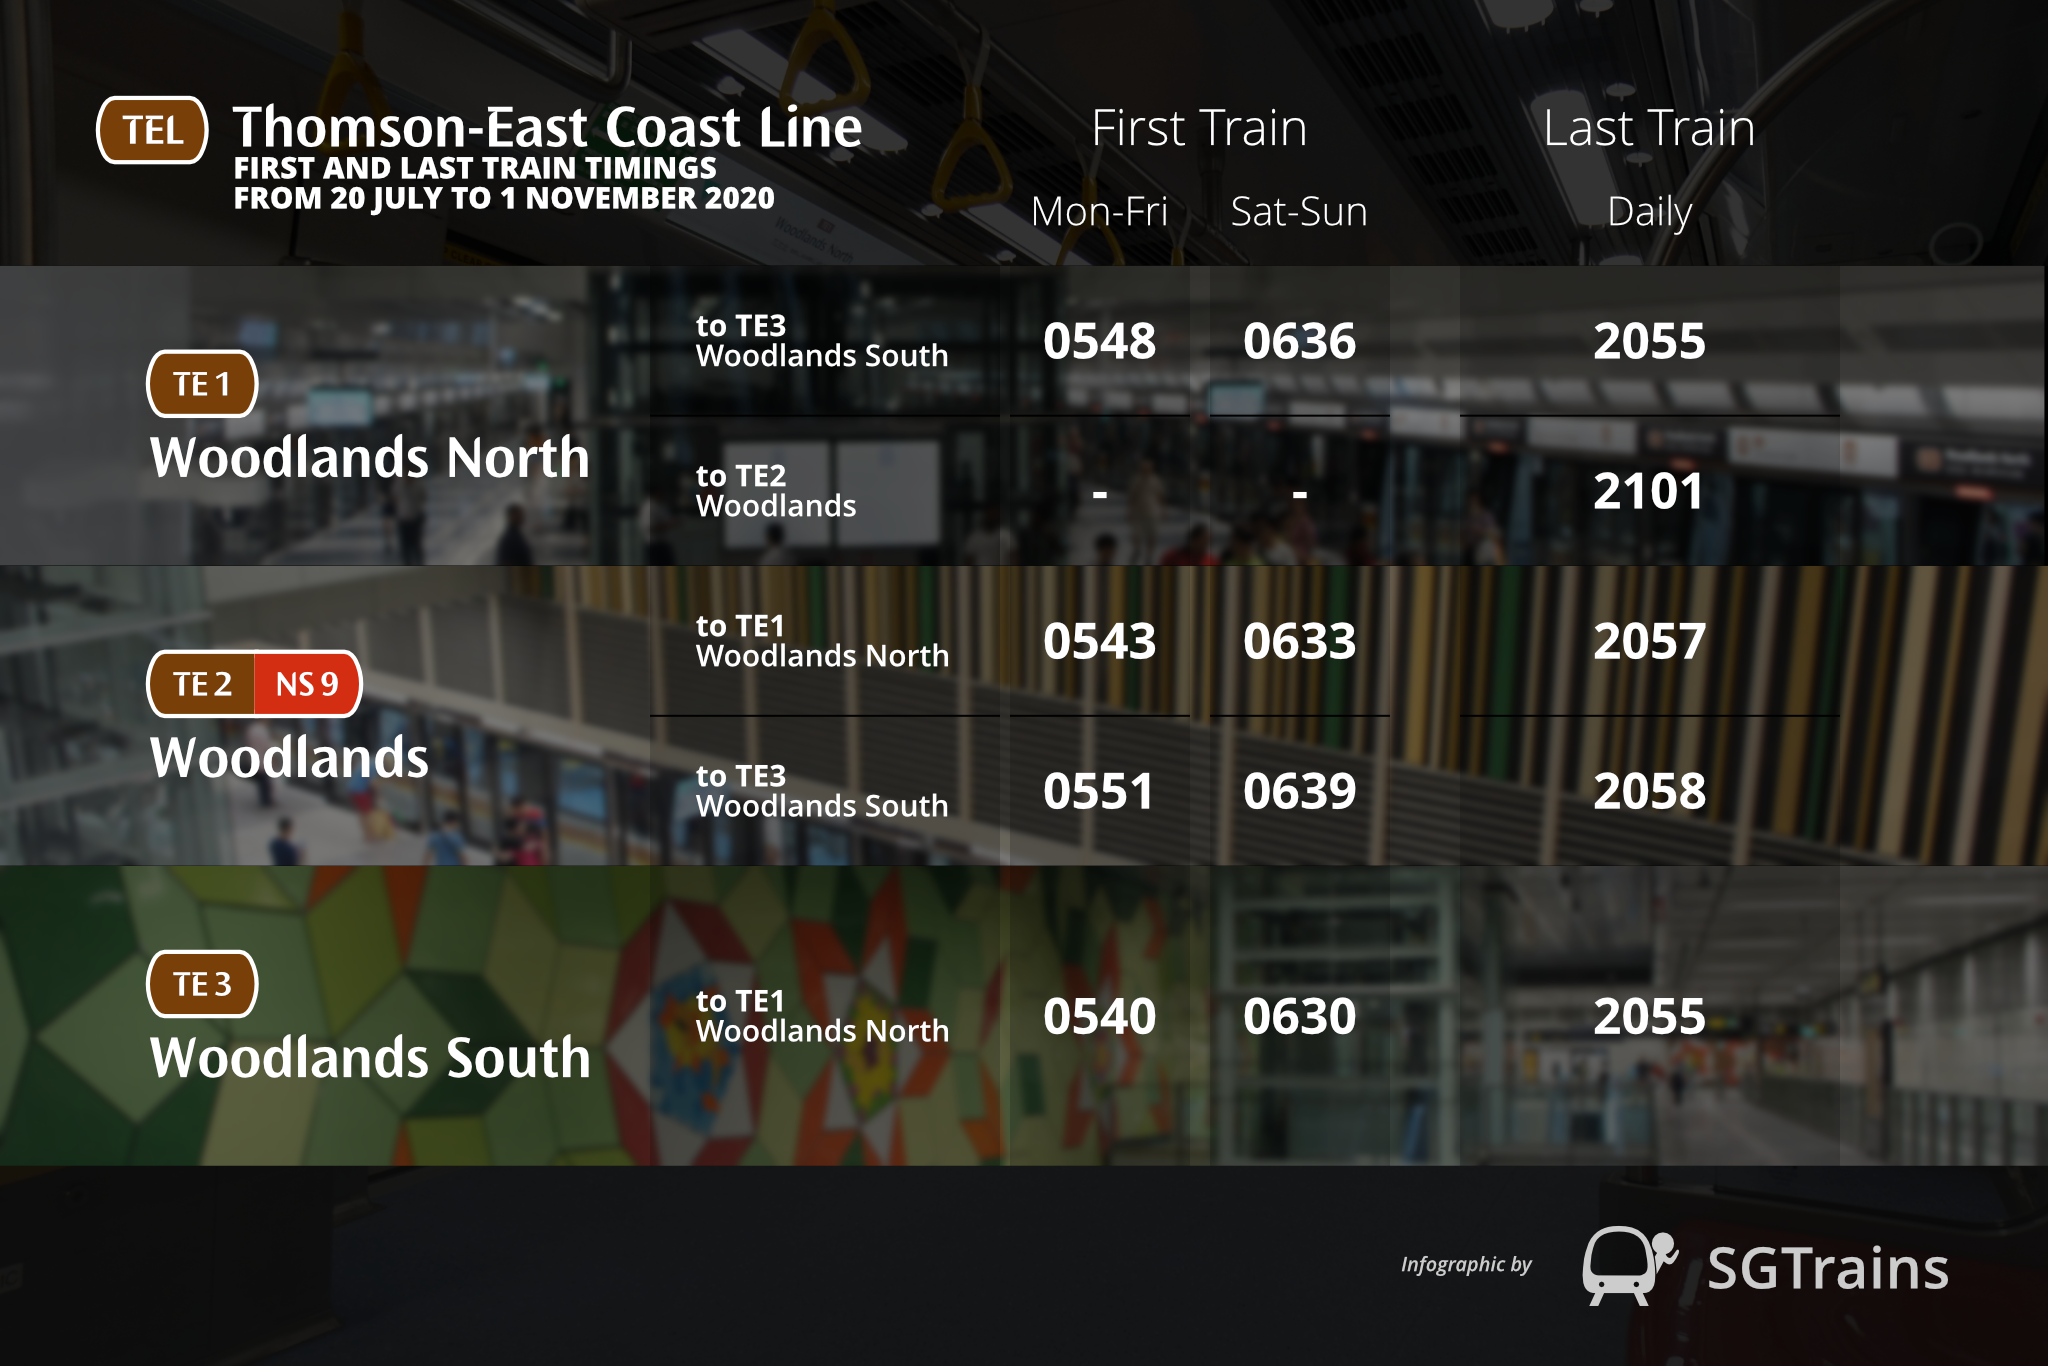 Changes to Thomson-East Coast Line Operating Hours from August to November 2020